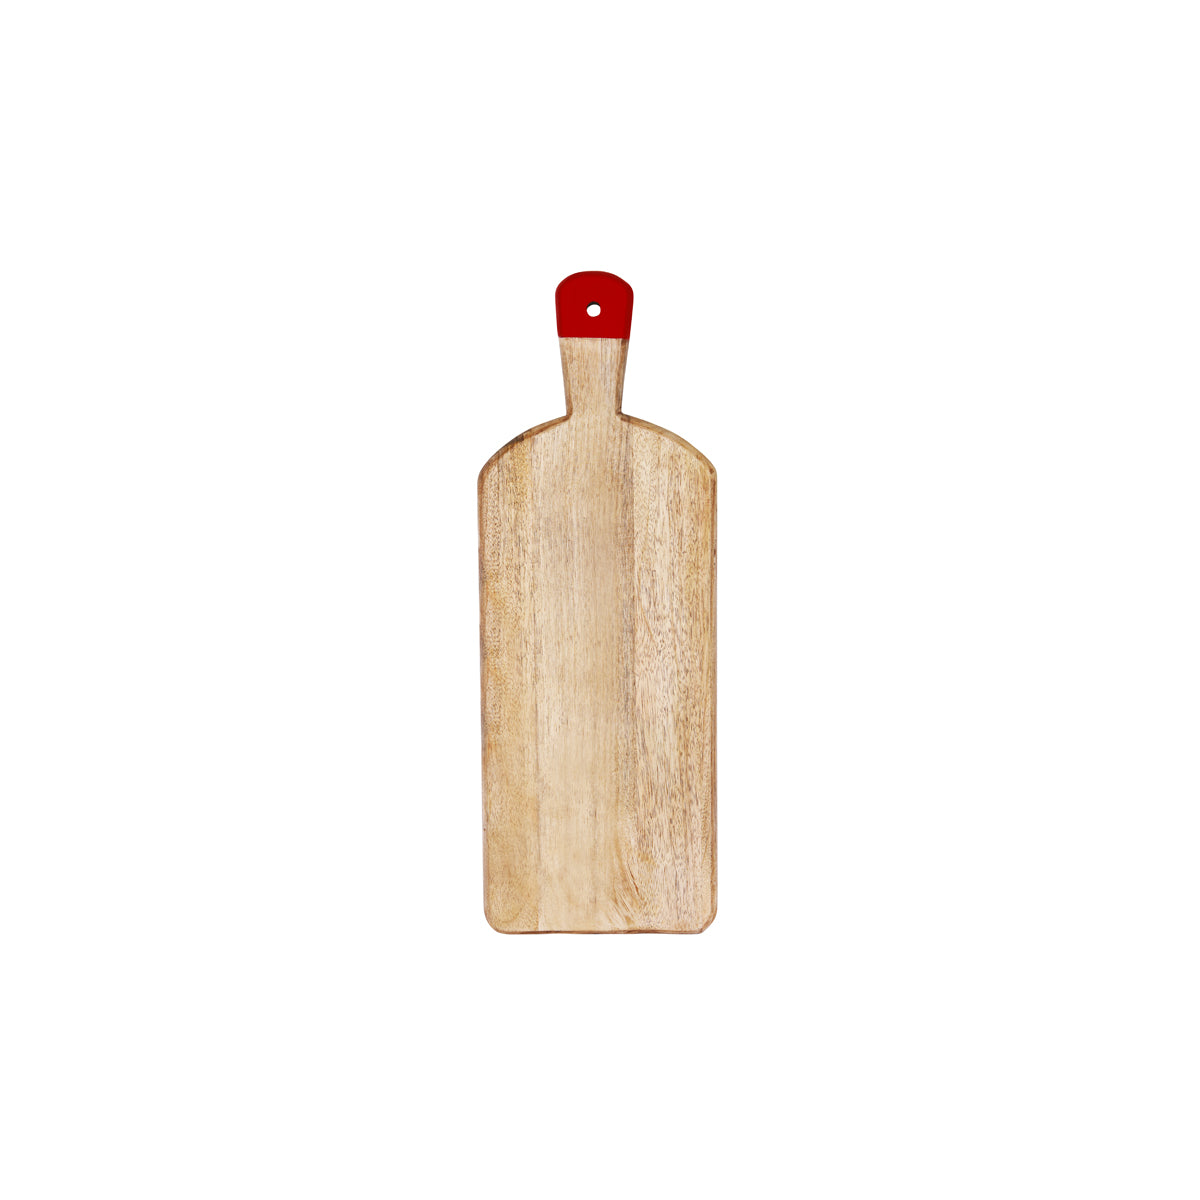 04996 Chef Inox Serve Mangowood Rectangular Serving Board with Red Handle 500x180x40mm Tomkin Australia Hospitality Supplies